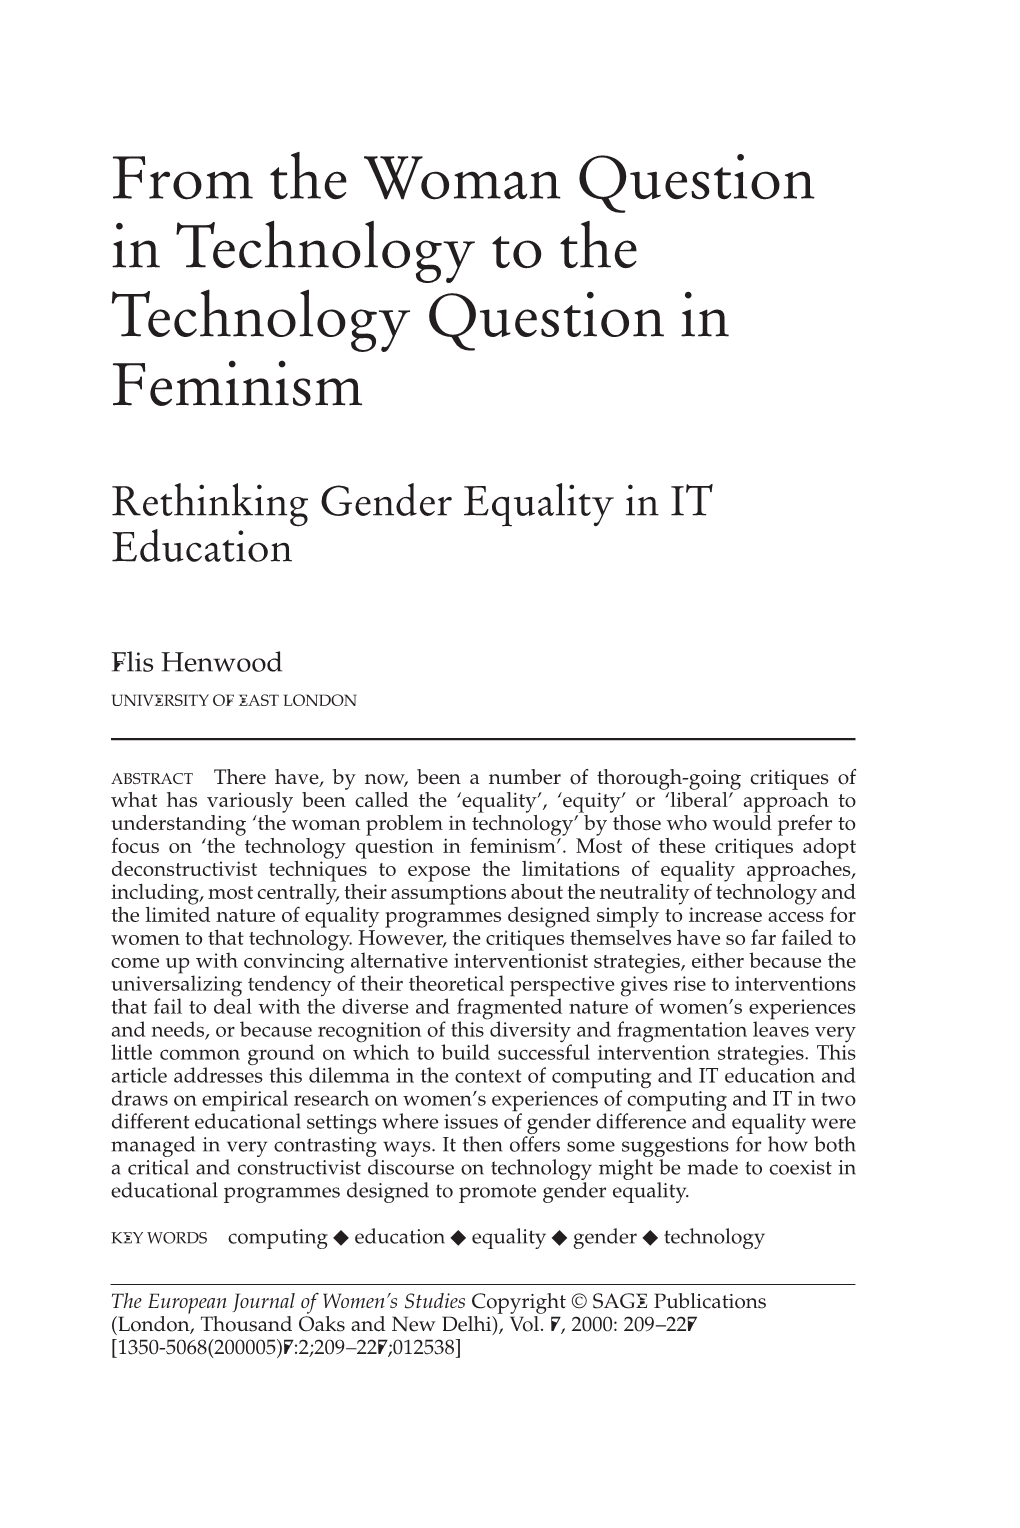 From the Woman Question in Technology to the Technology Question in Feminism